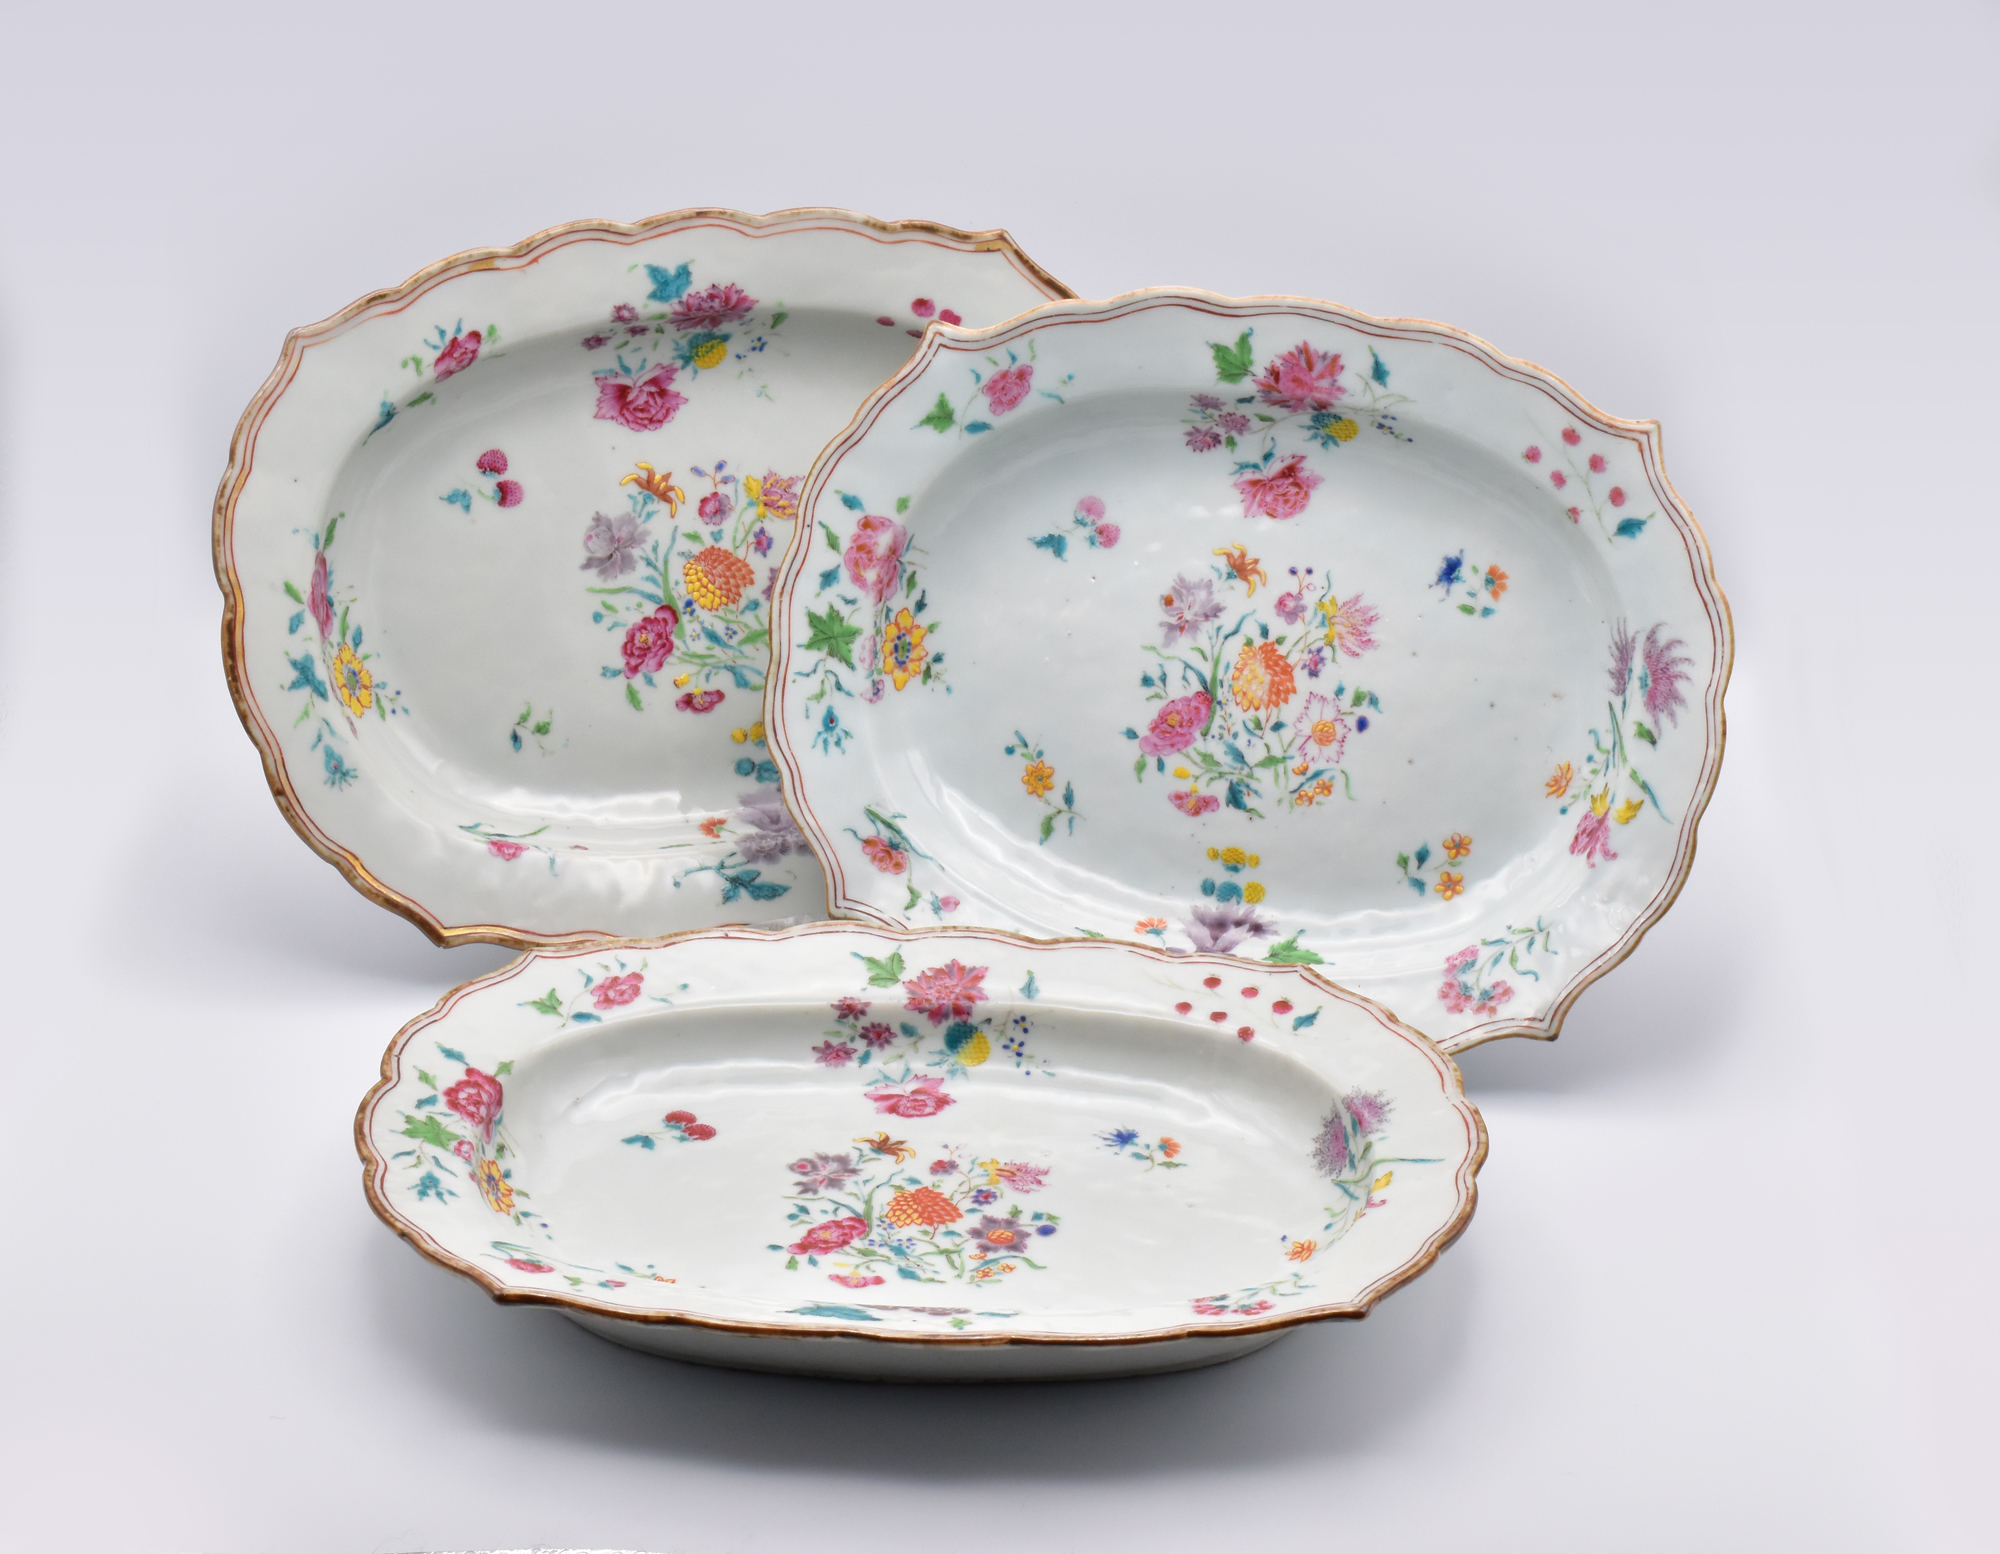 A SET OF THREE CHINESE EXPORT ‘FAMILLE-ROSE’ PORCELAIN MEAT DISHES, QIANLONG PERIOD, 1736 – 1795